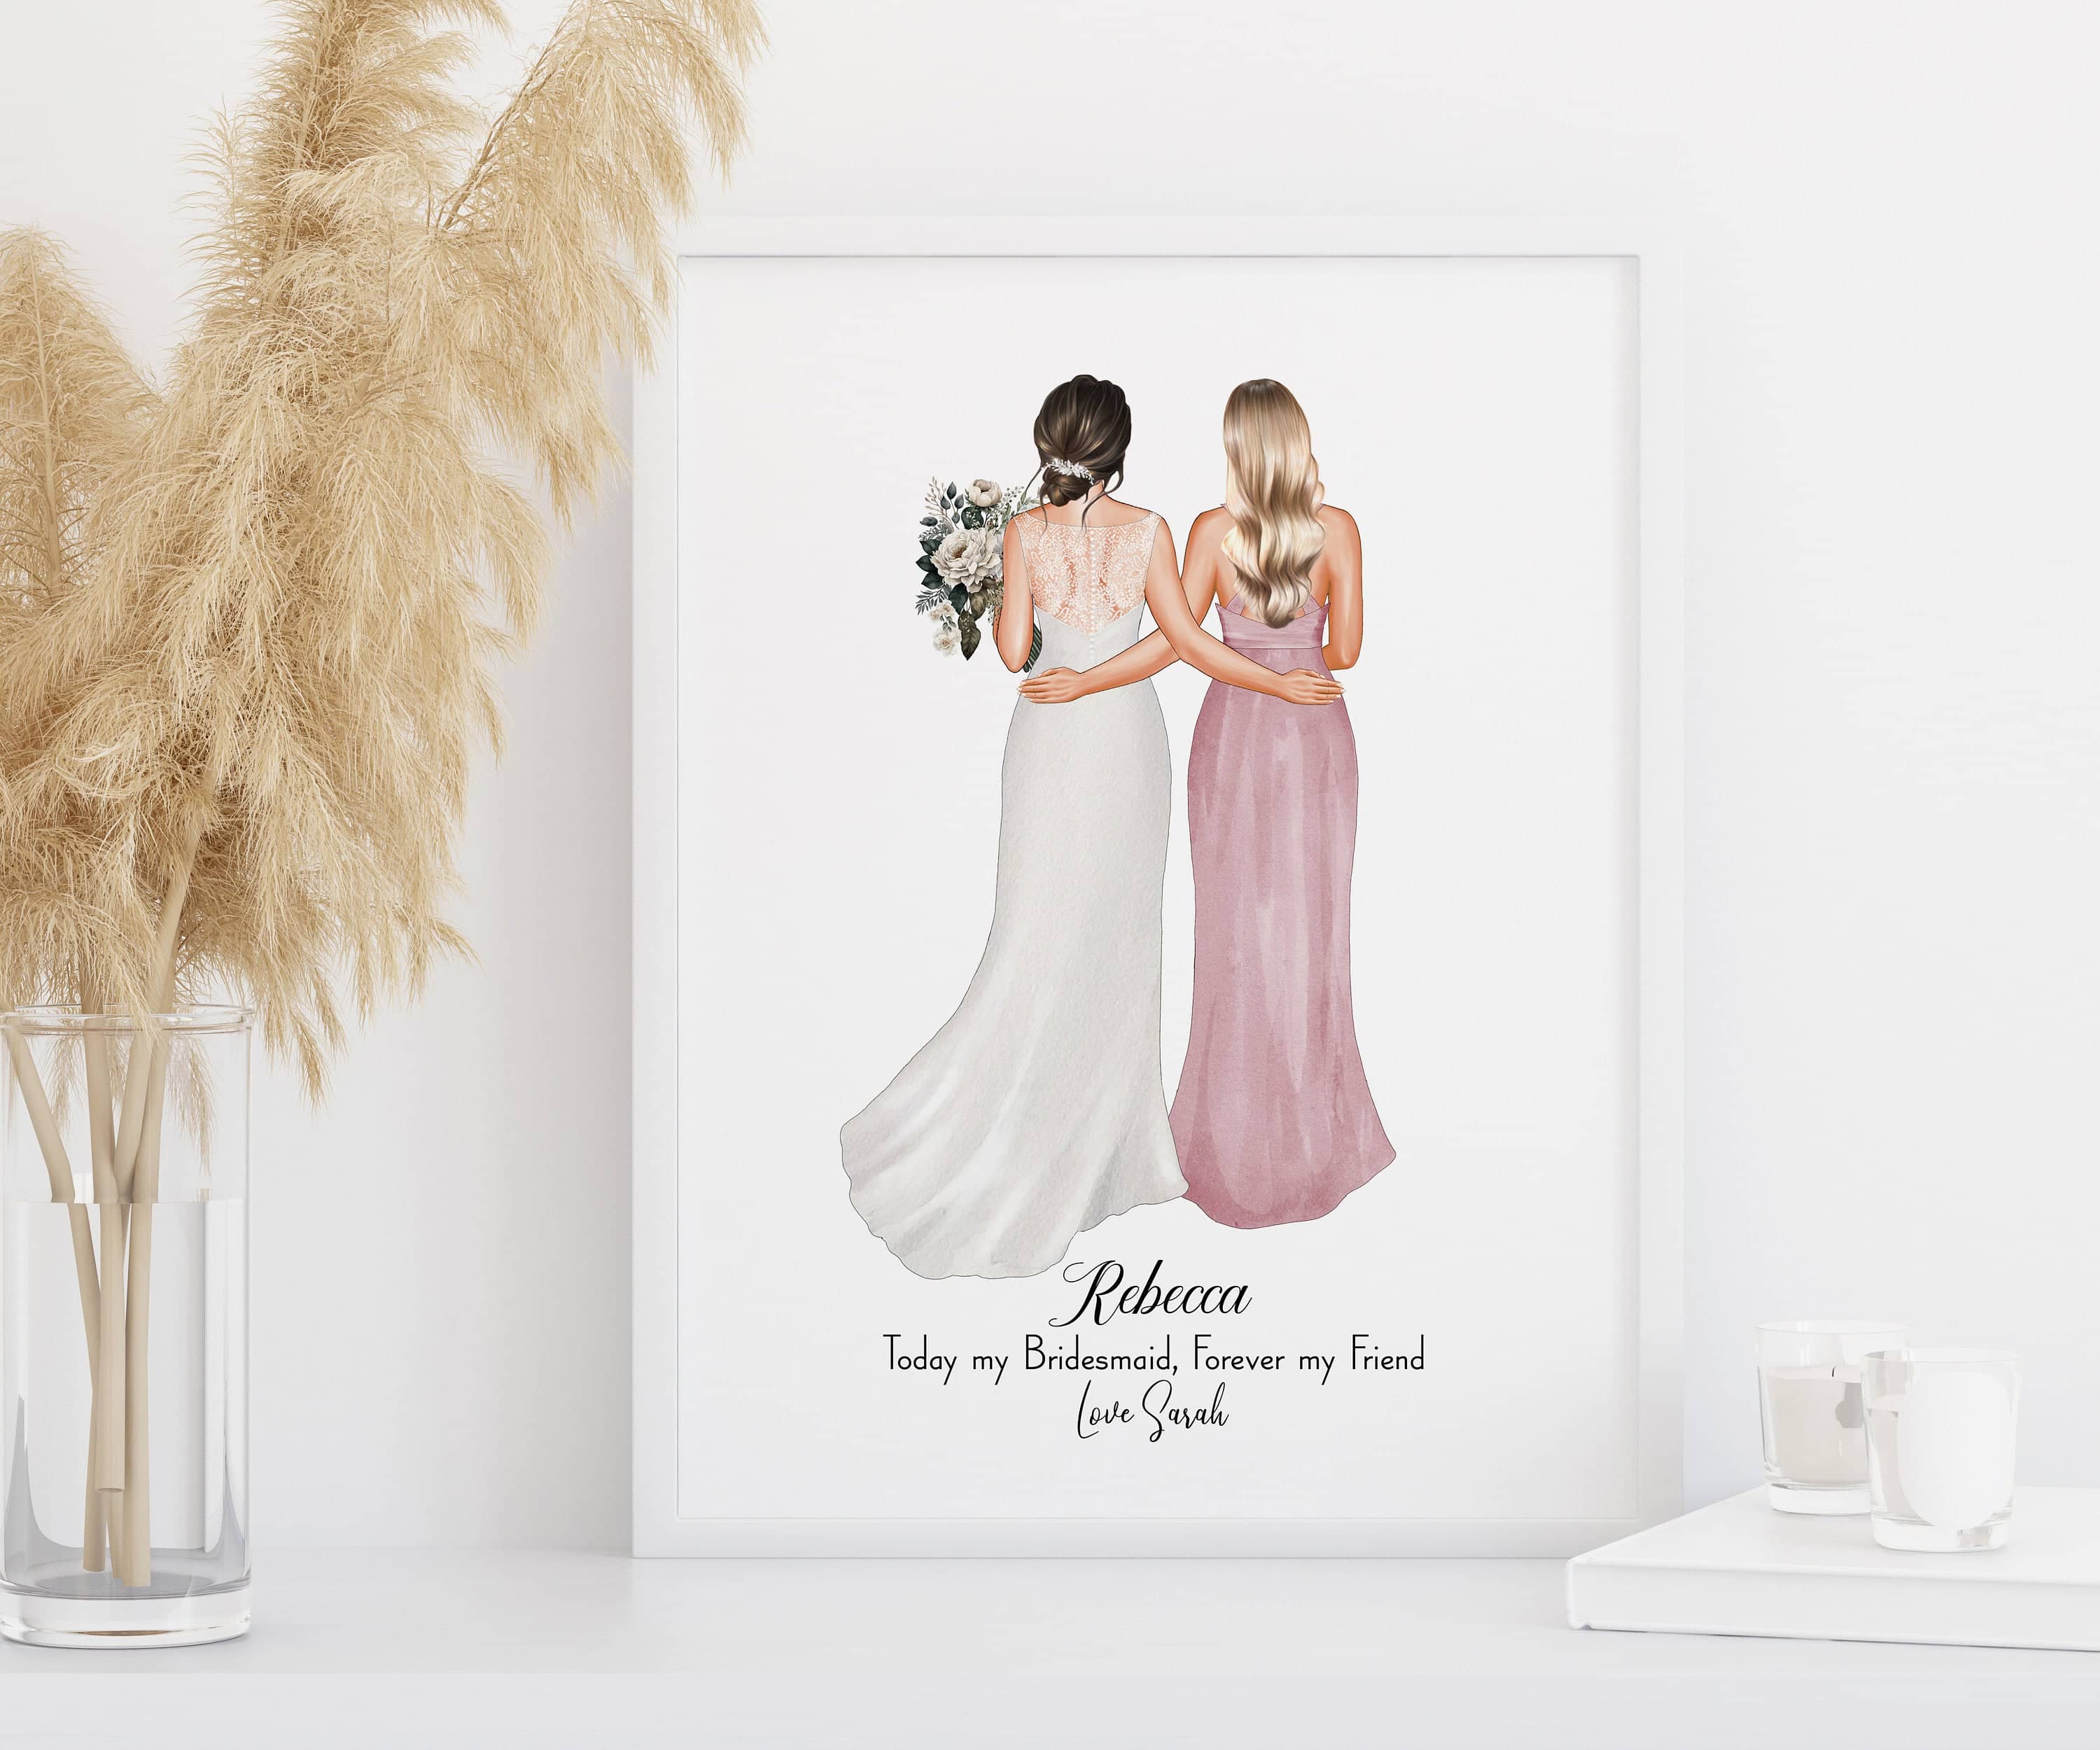 Personalised Bridesmaid Print, Bridesmaid Gifts, Best Friend Gifts, Wedding Gifts, Thank you Gift, Bridal Shower, Bachelorette Party, Custom